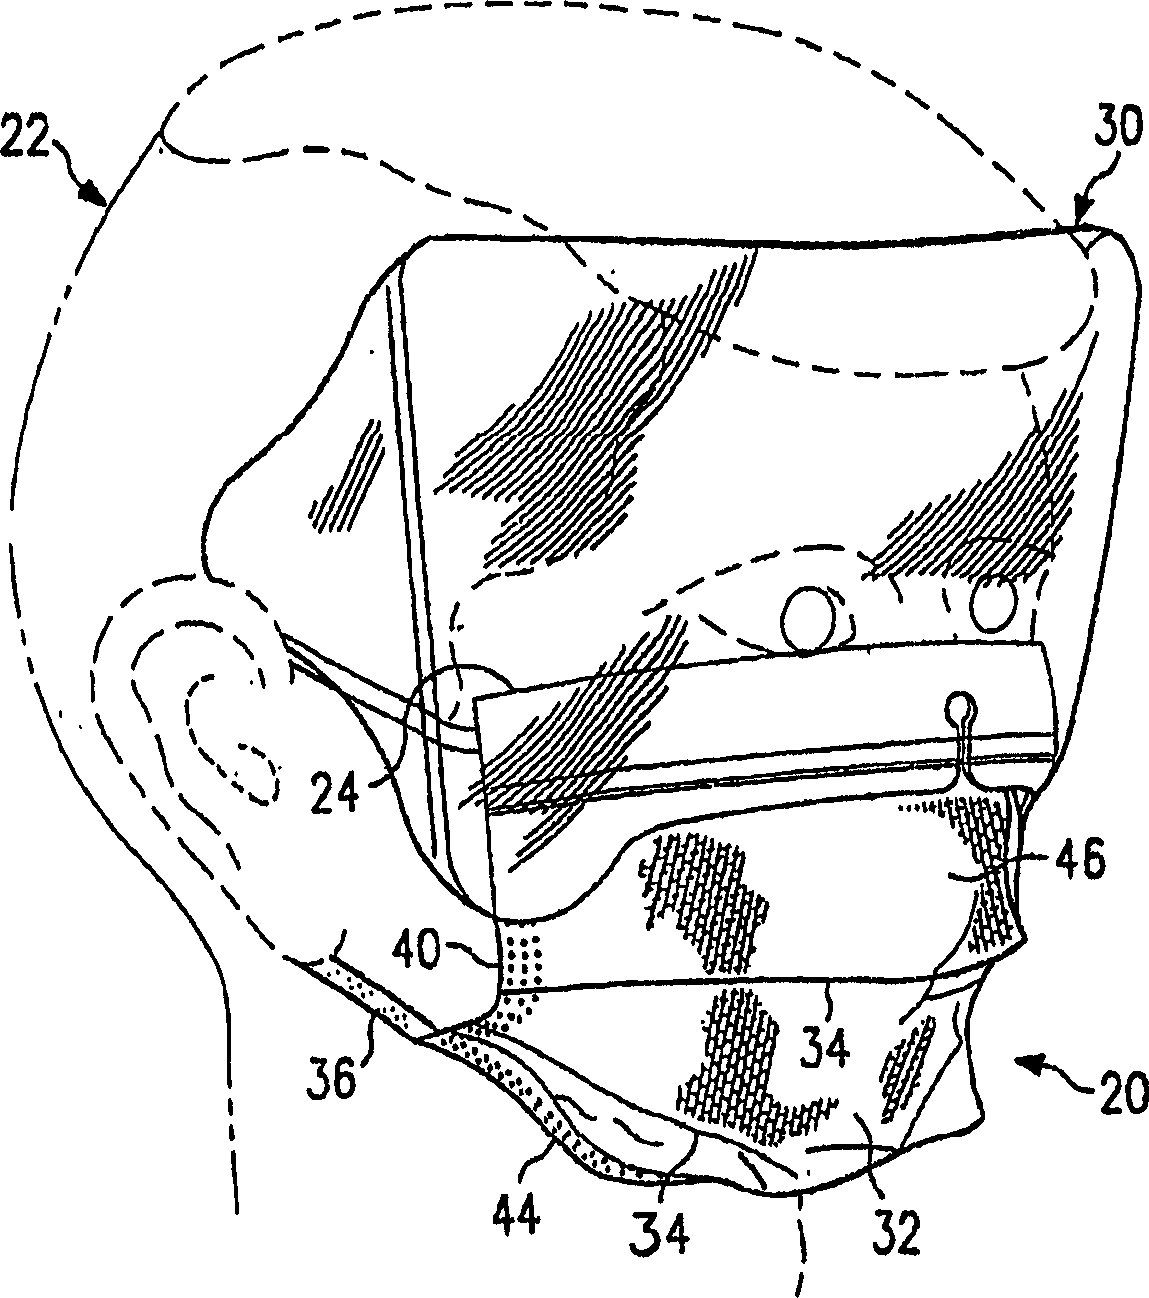 Facemasks containing an anti-fog/anti-glare composition